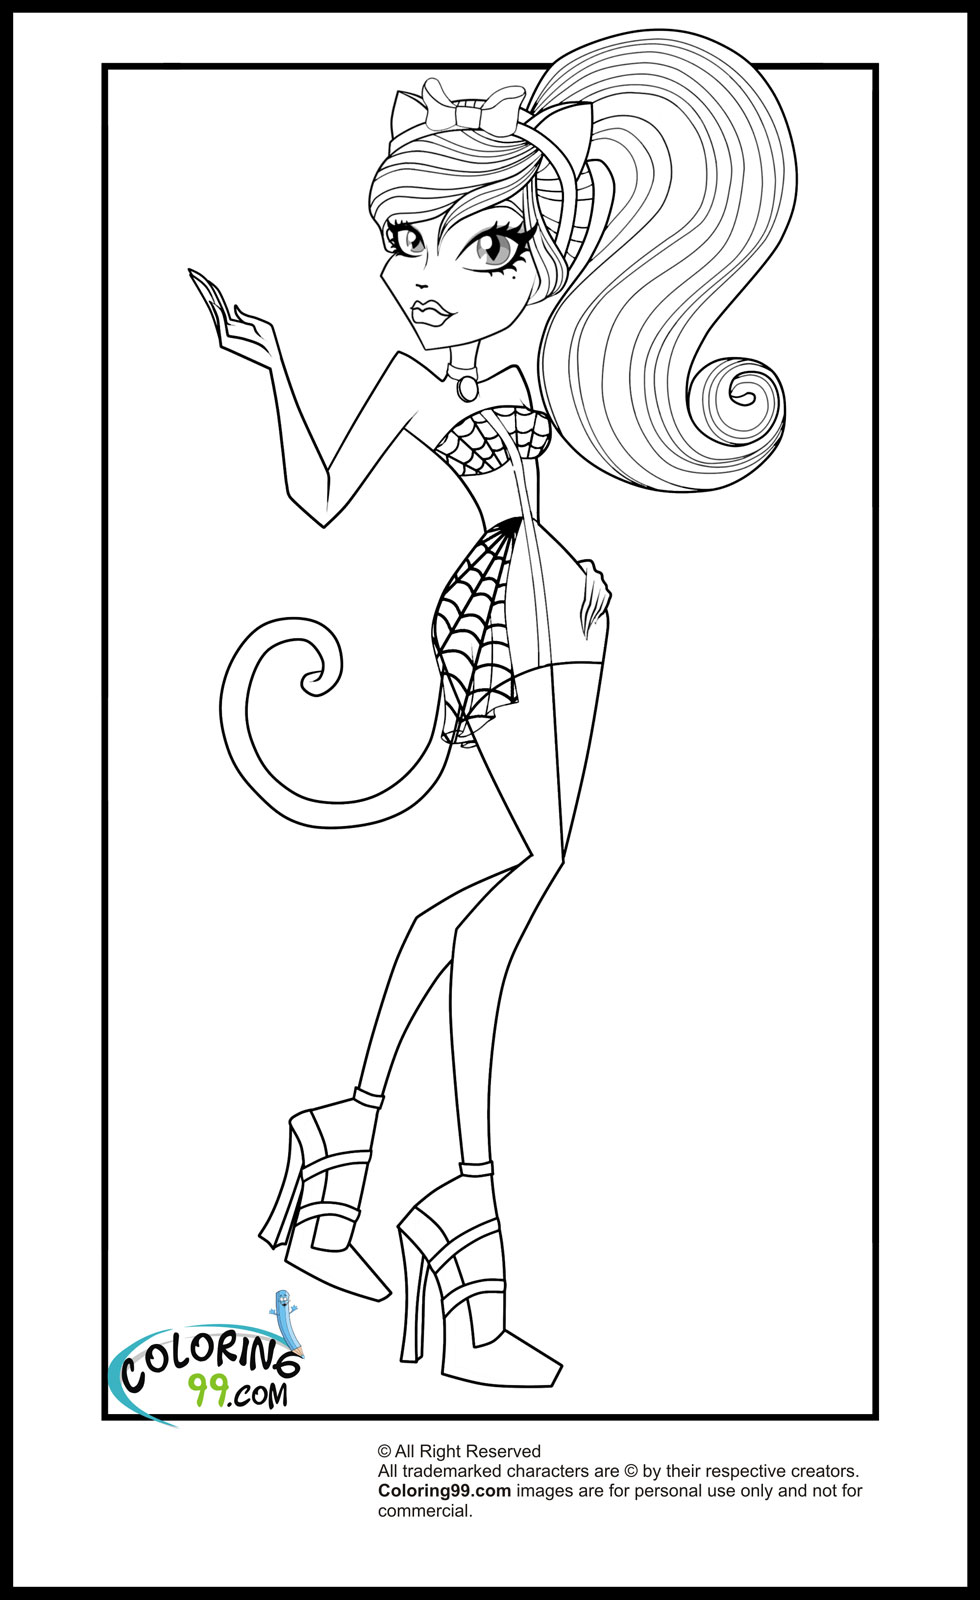 color pages monster high monster high coloring pages team colors pages monster color high 